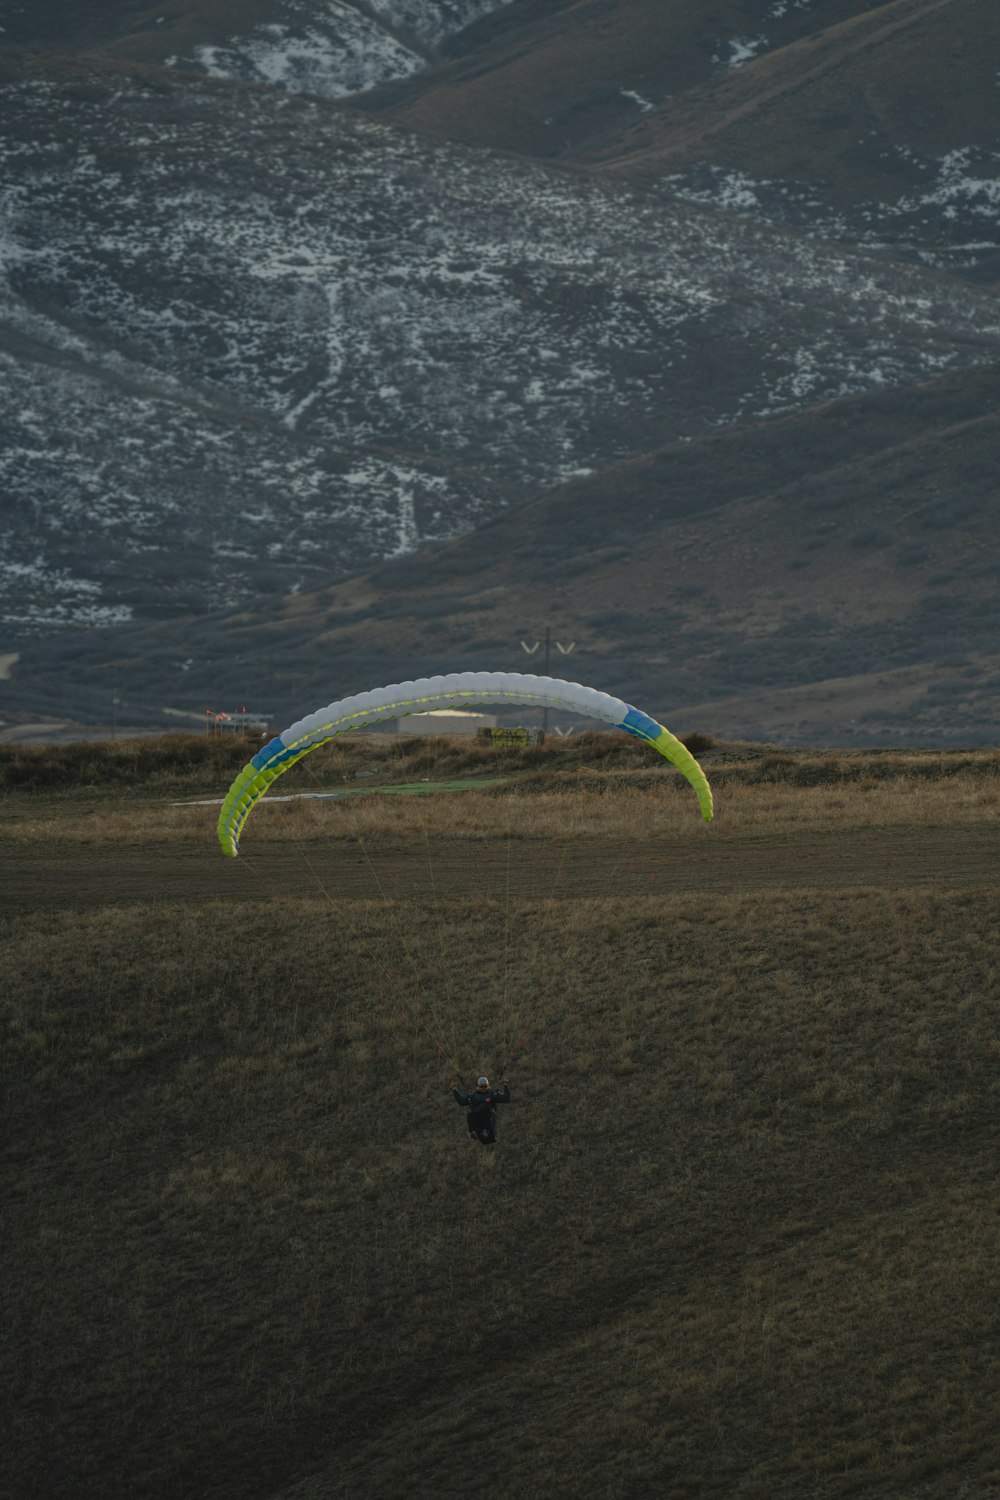 a person parasailing in a field with mountains in the background